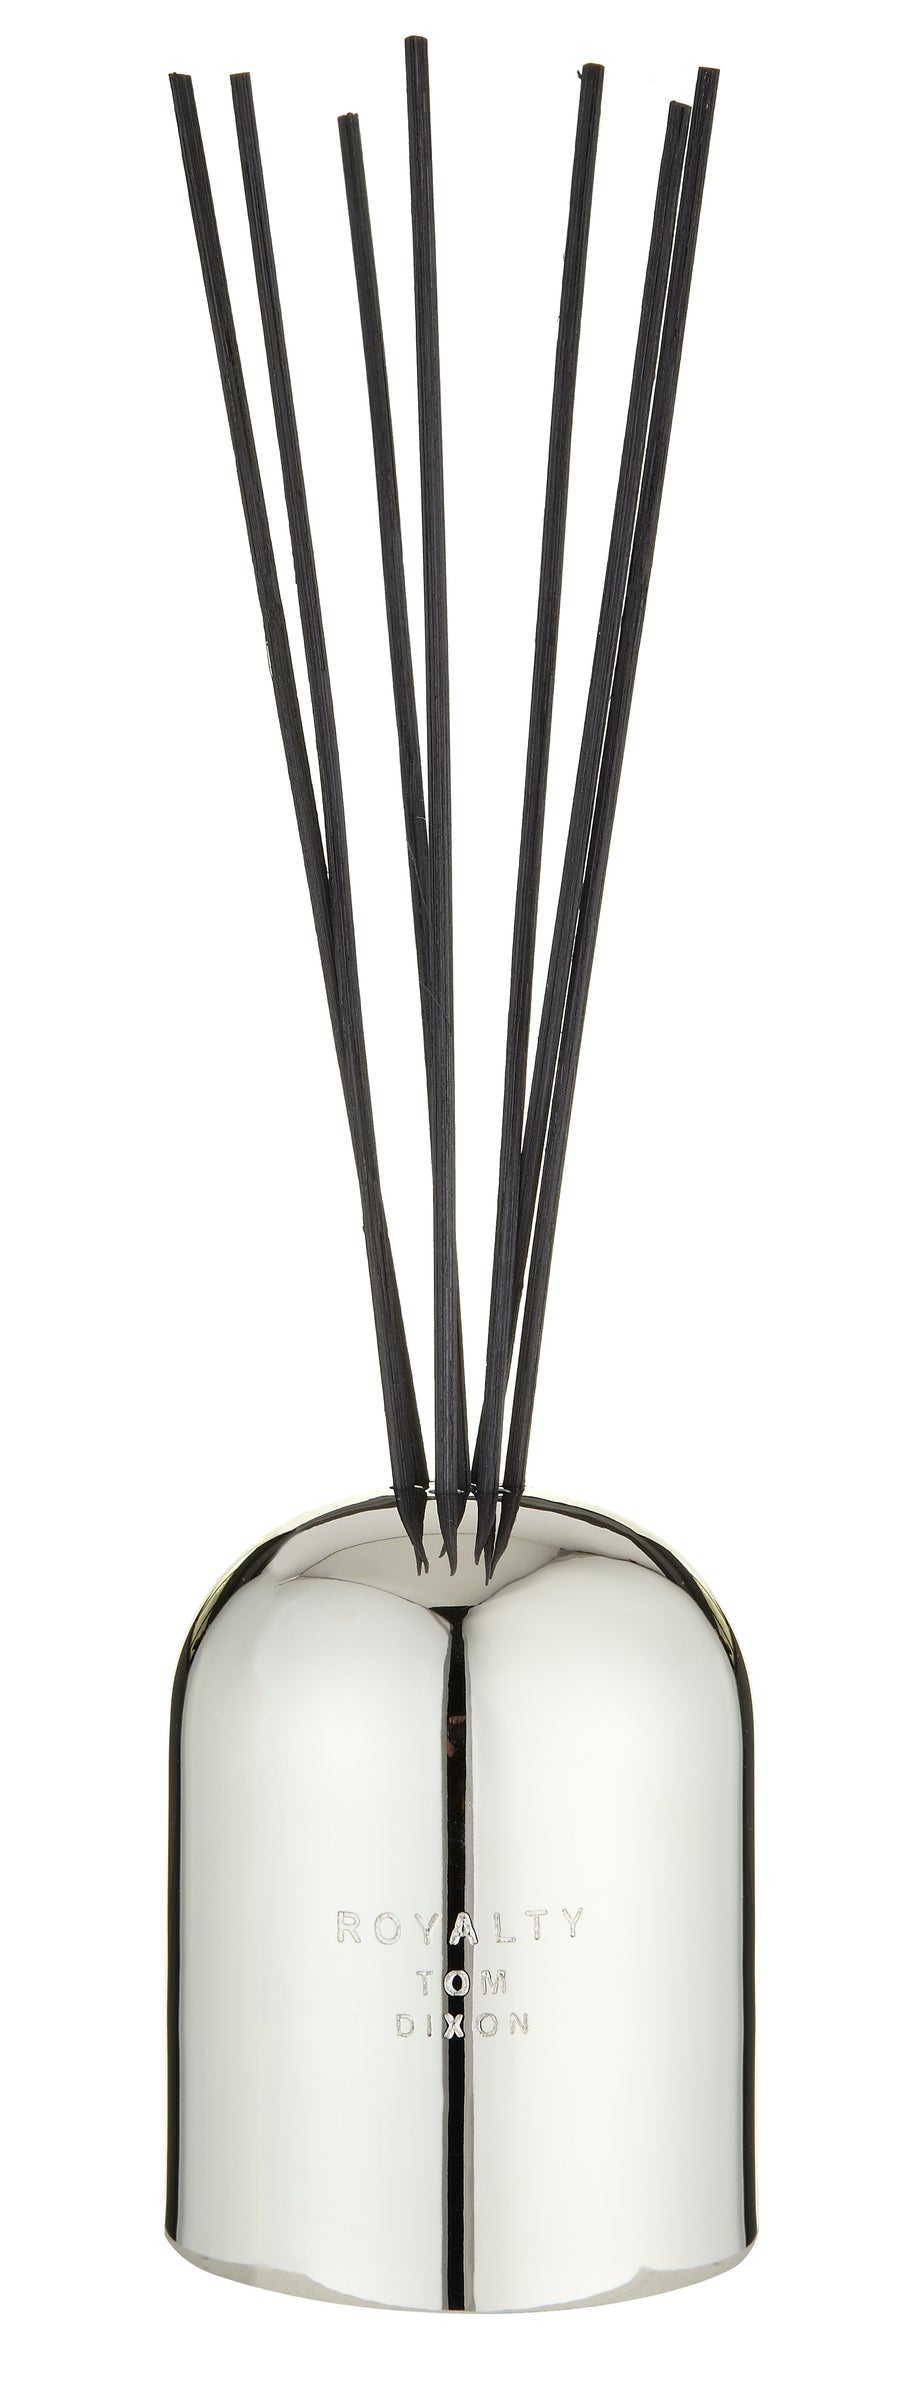 Royalty Scent Eclectic Diffuser